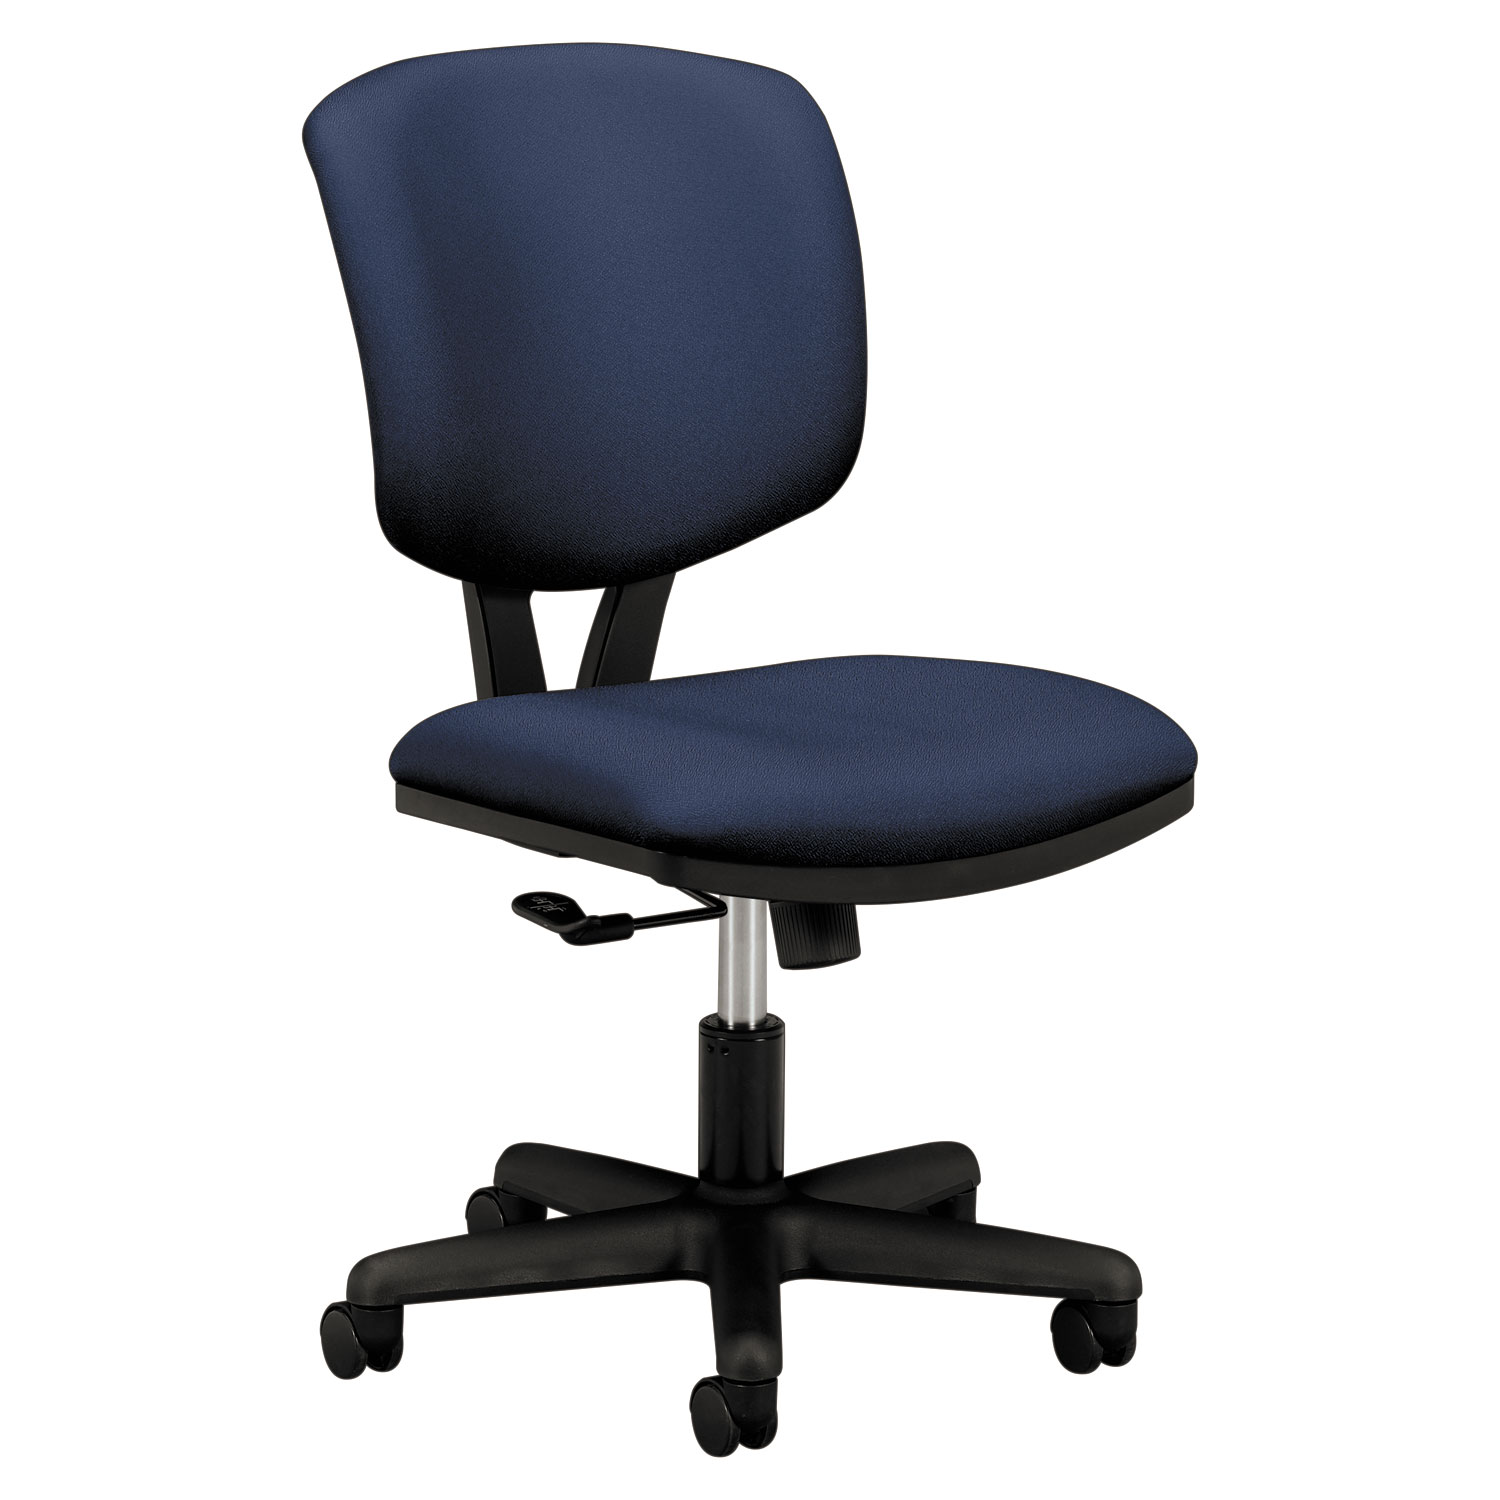  HON H5701.GA90.T Volt Series Task Chair, Supports up to 250 lbs., Navy Seat/Navy Back, Black Base (HON5701GA90T) 